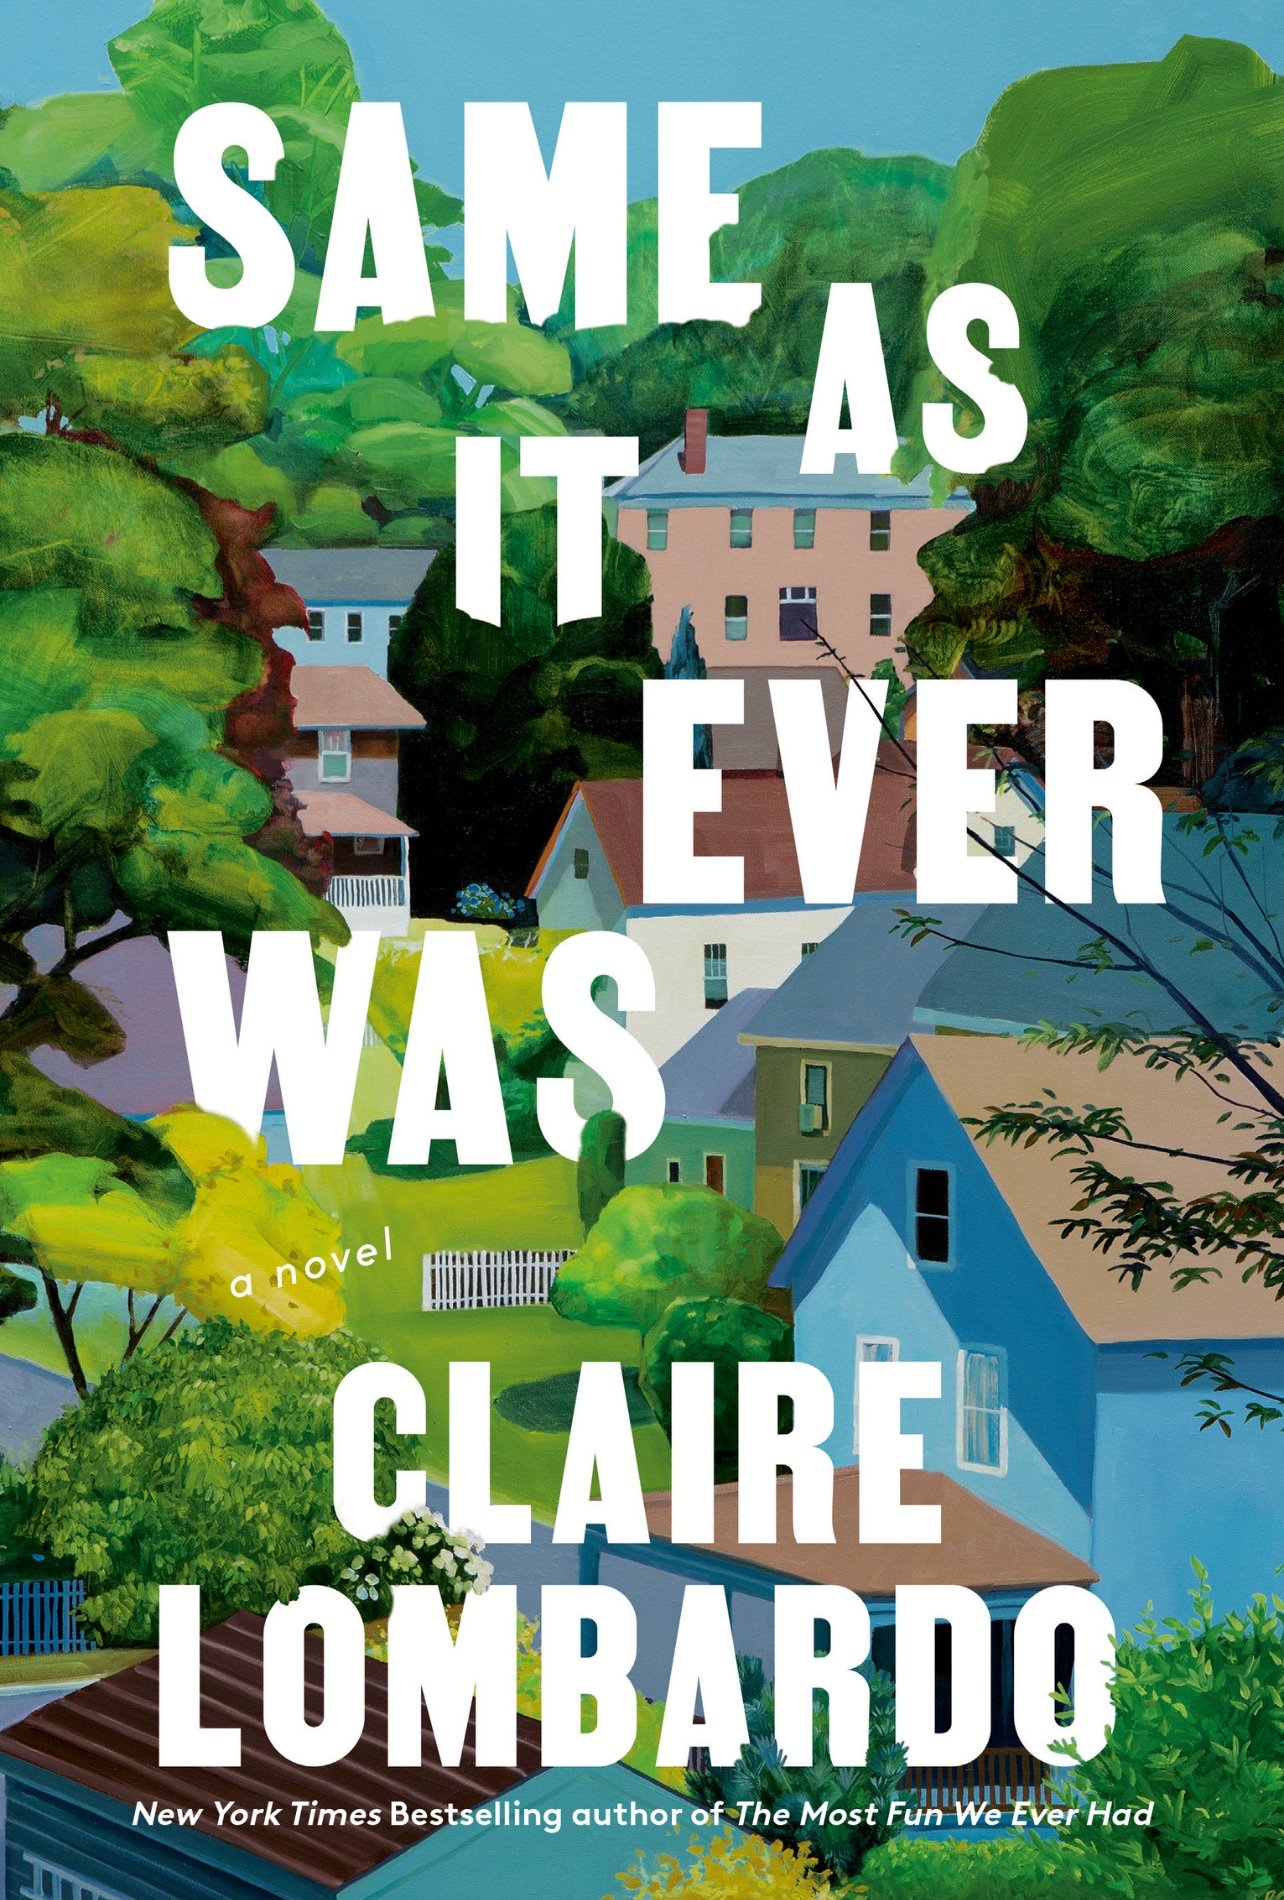 “Same as it Ever Was” book cover by Claire Lombardo